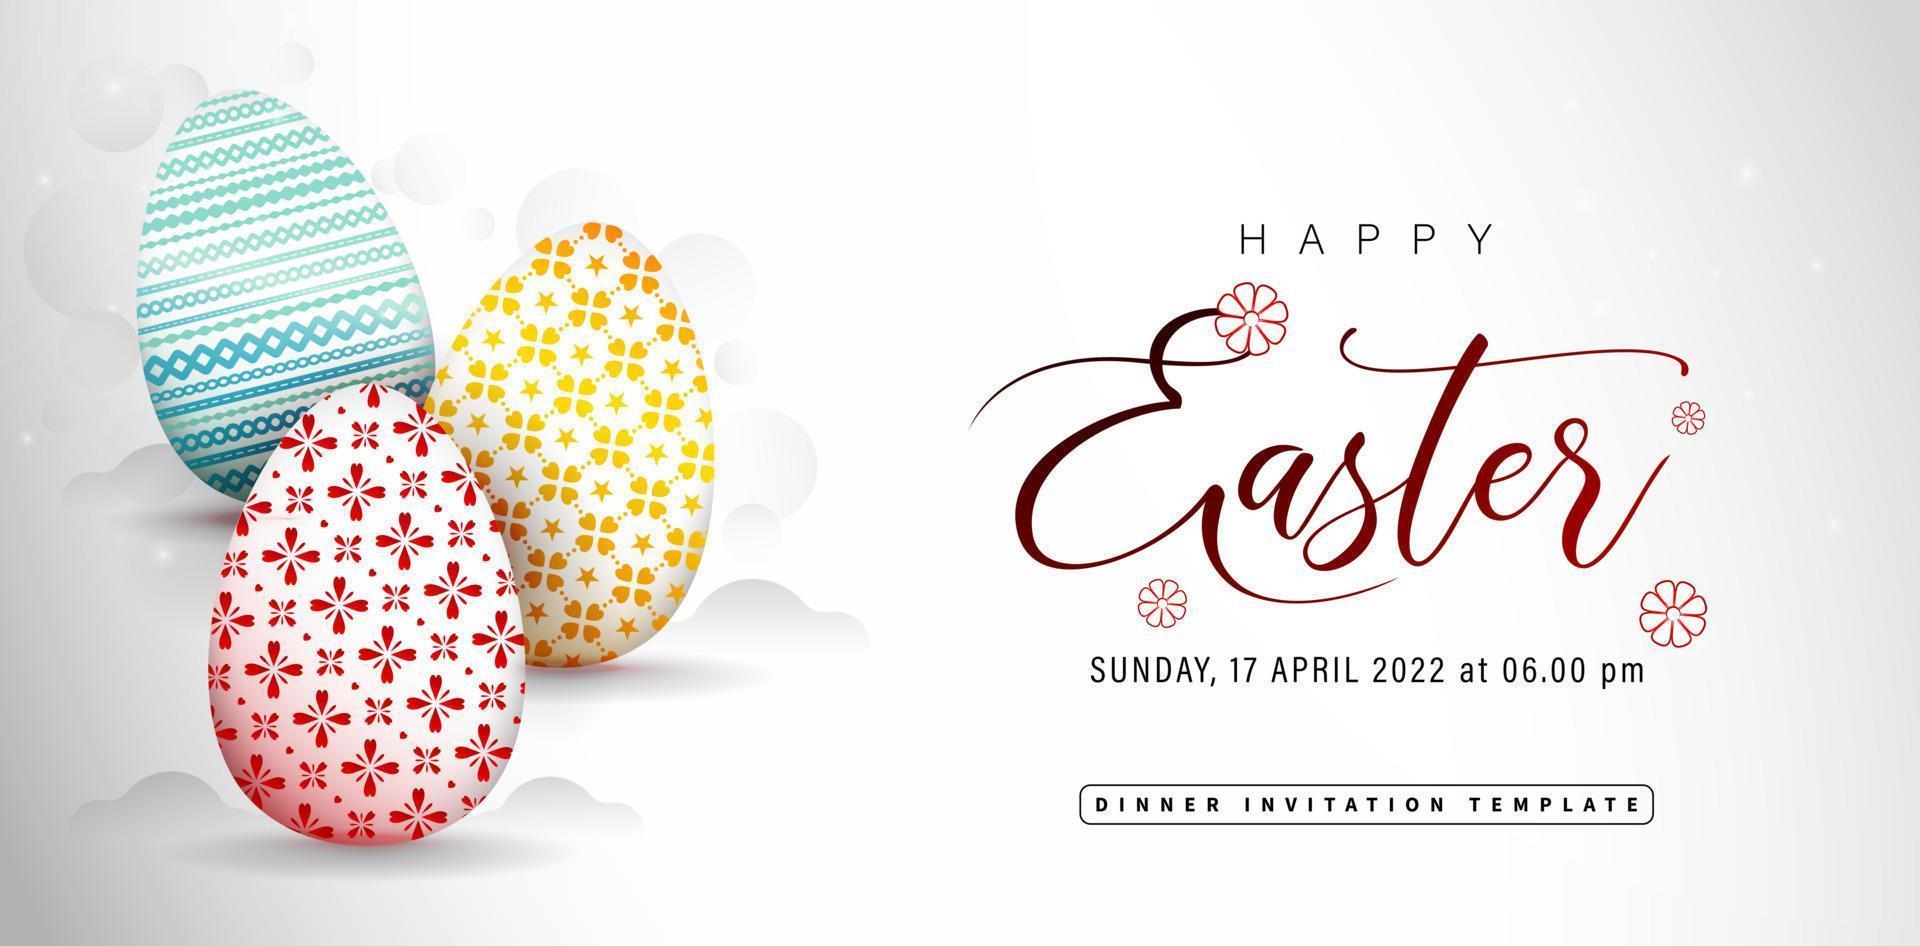 Happy Easter greeting card with three colorful eggs, applicable for website banner, corporate sign, greeting cards, invitation template, social media posts, ads campaign, Instagram feeds, advertising vector